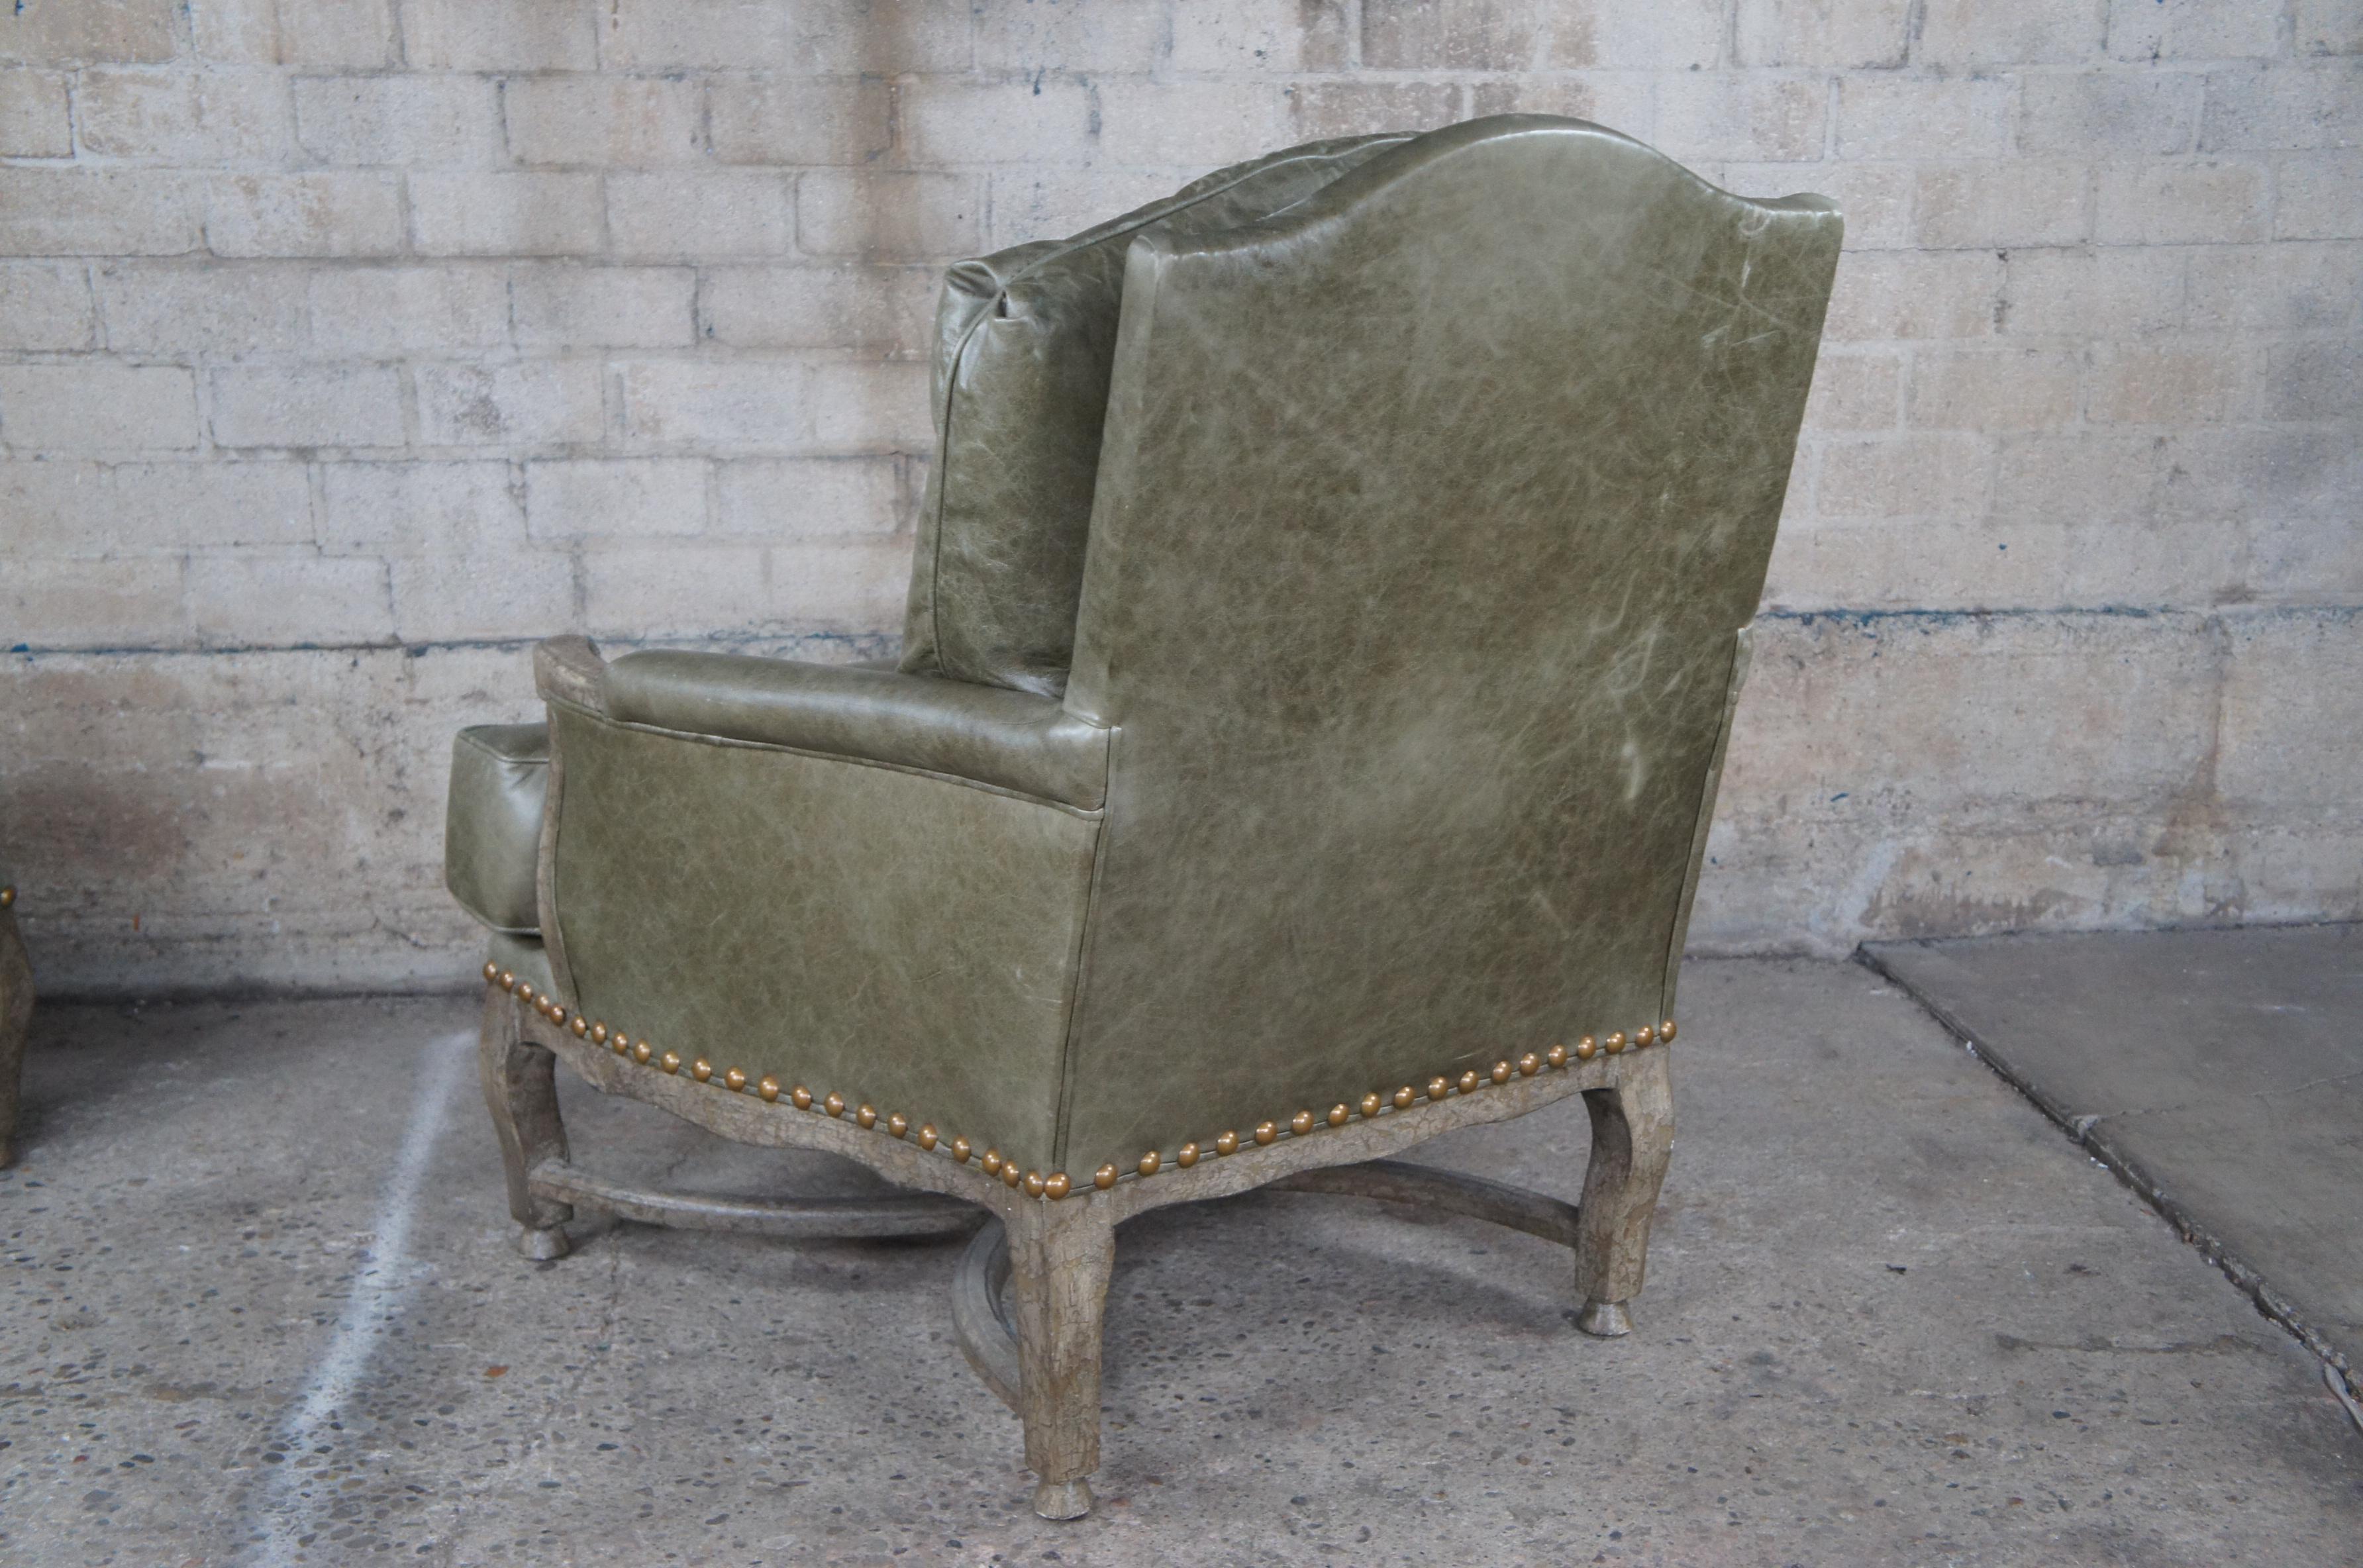 Hammer Dakota French Bergere Tuscan Green Leather Club Arm Lounge Chair Ottoman In Good Condition For Sale In Dayton, OH